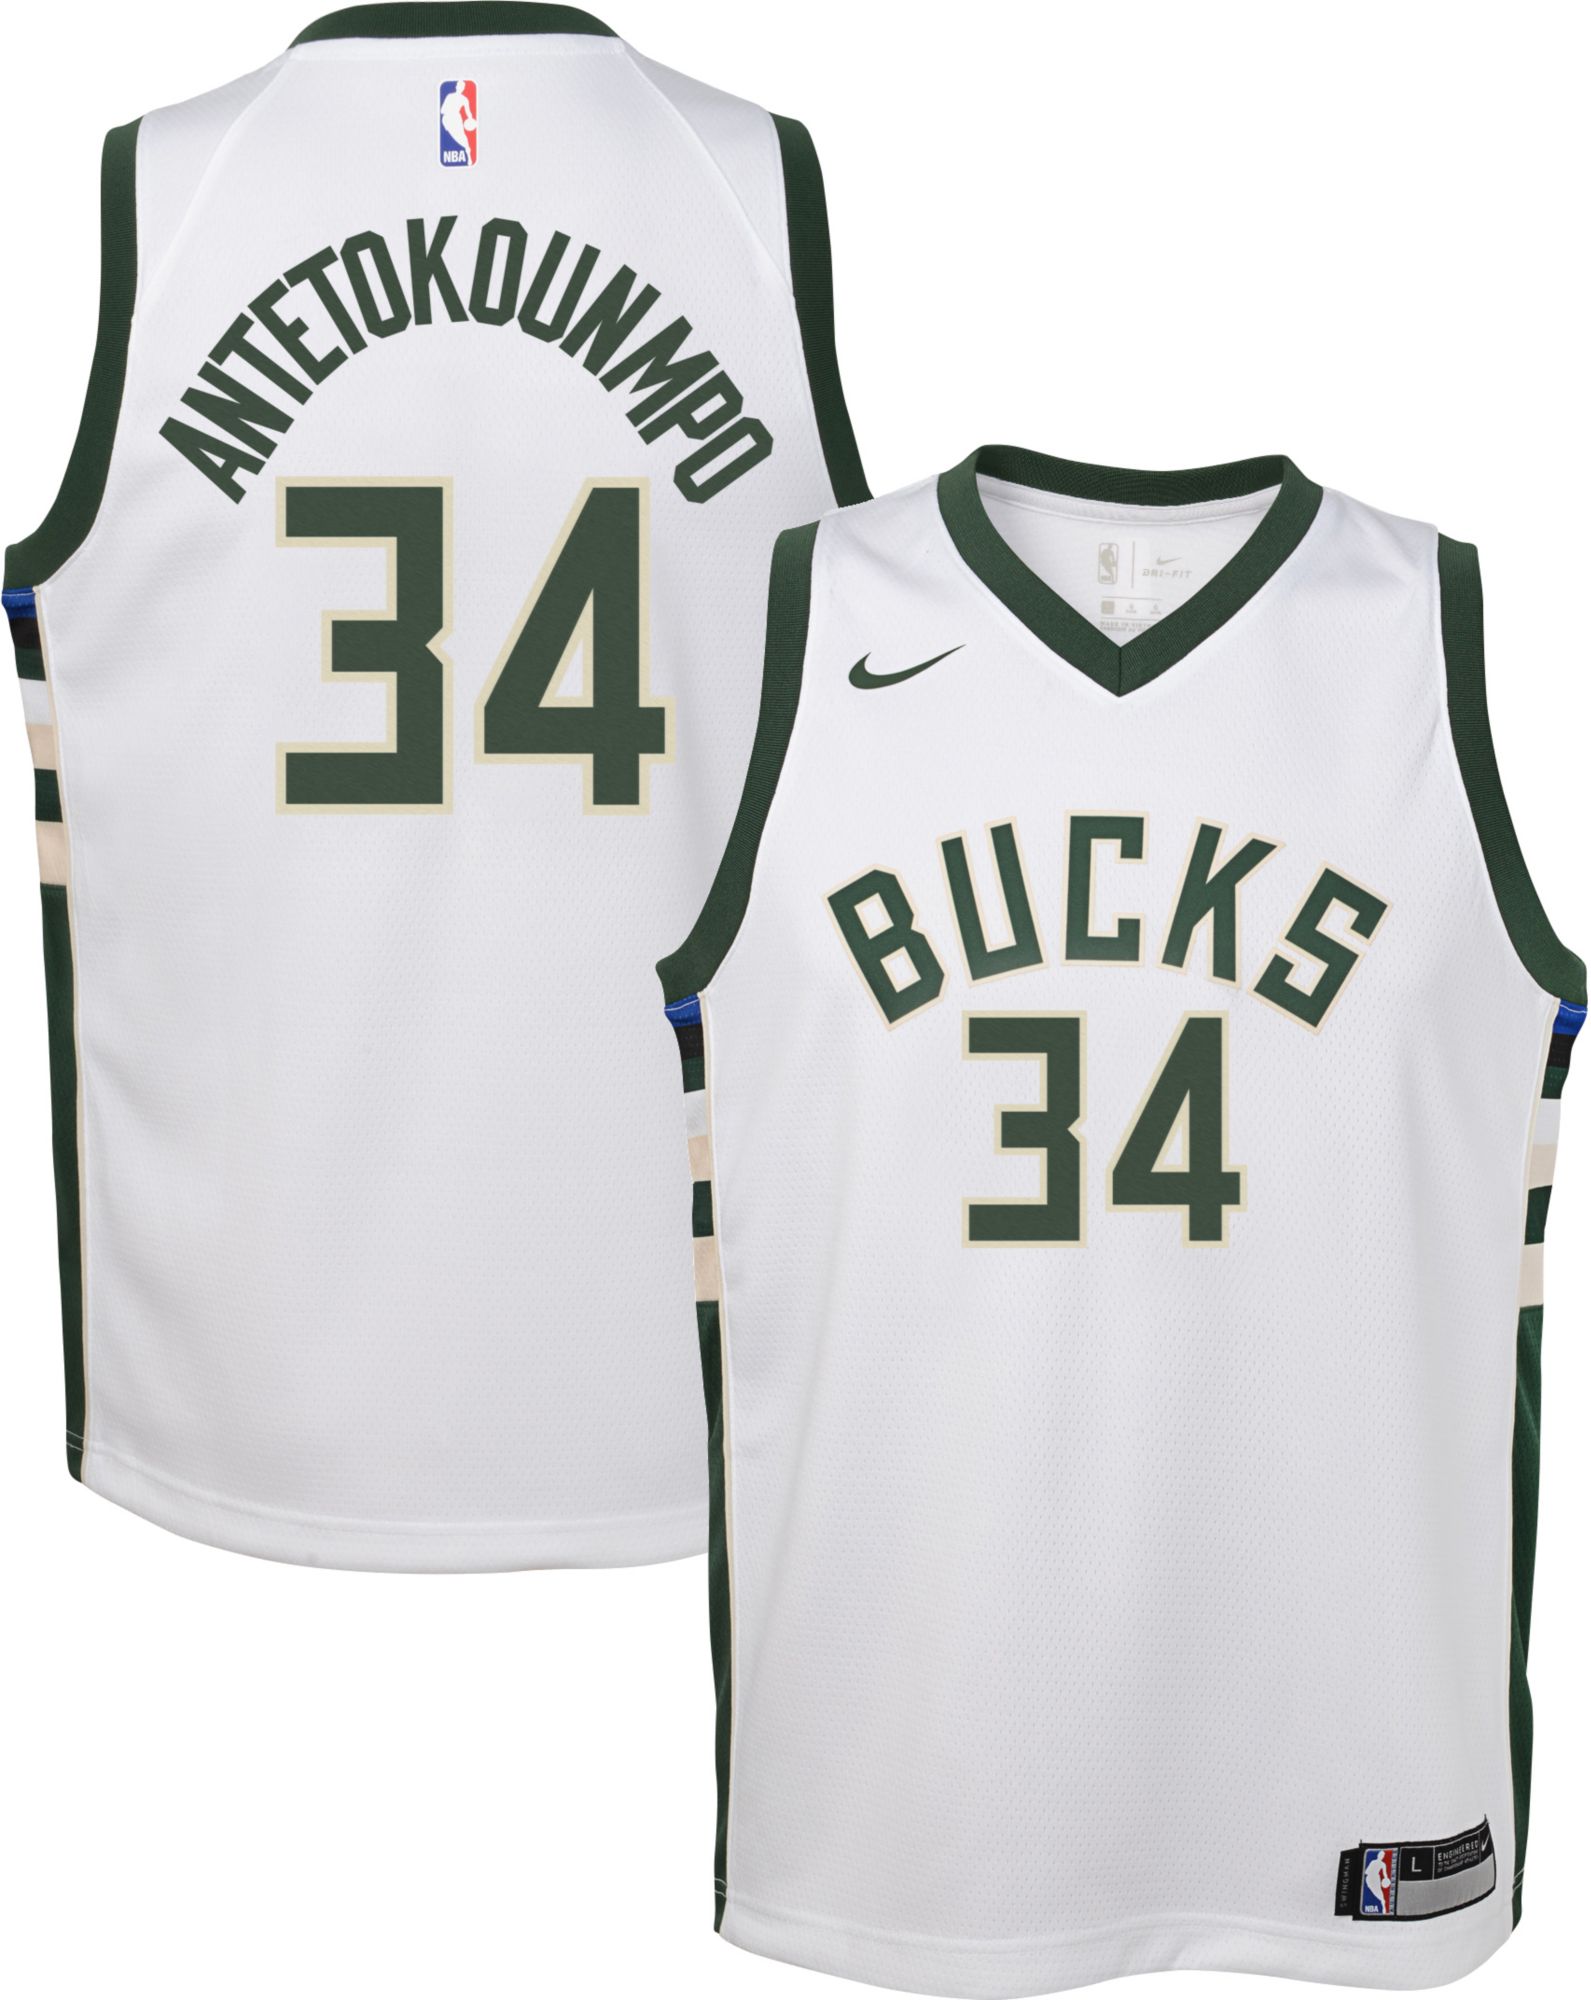 giannis youth jersey black